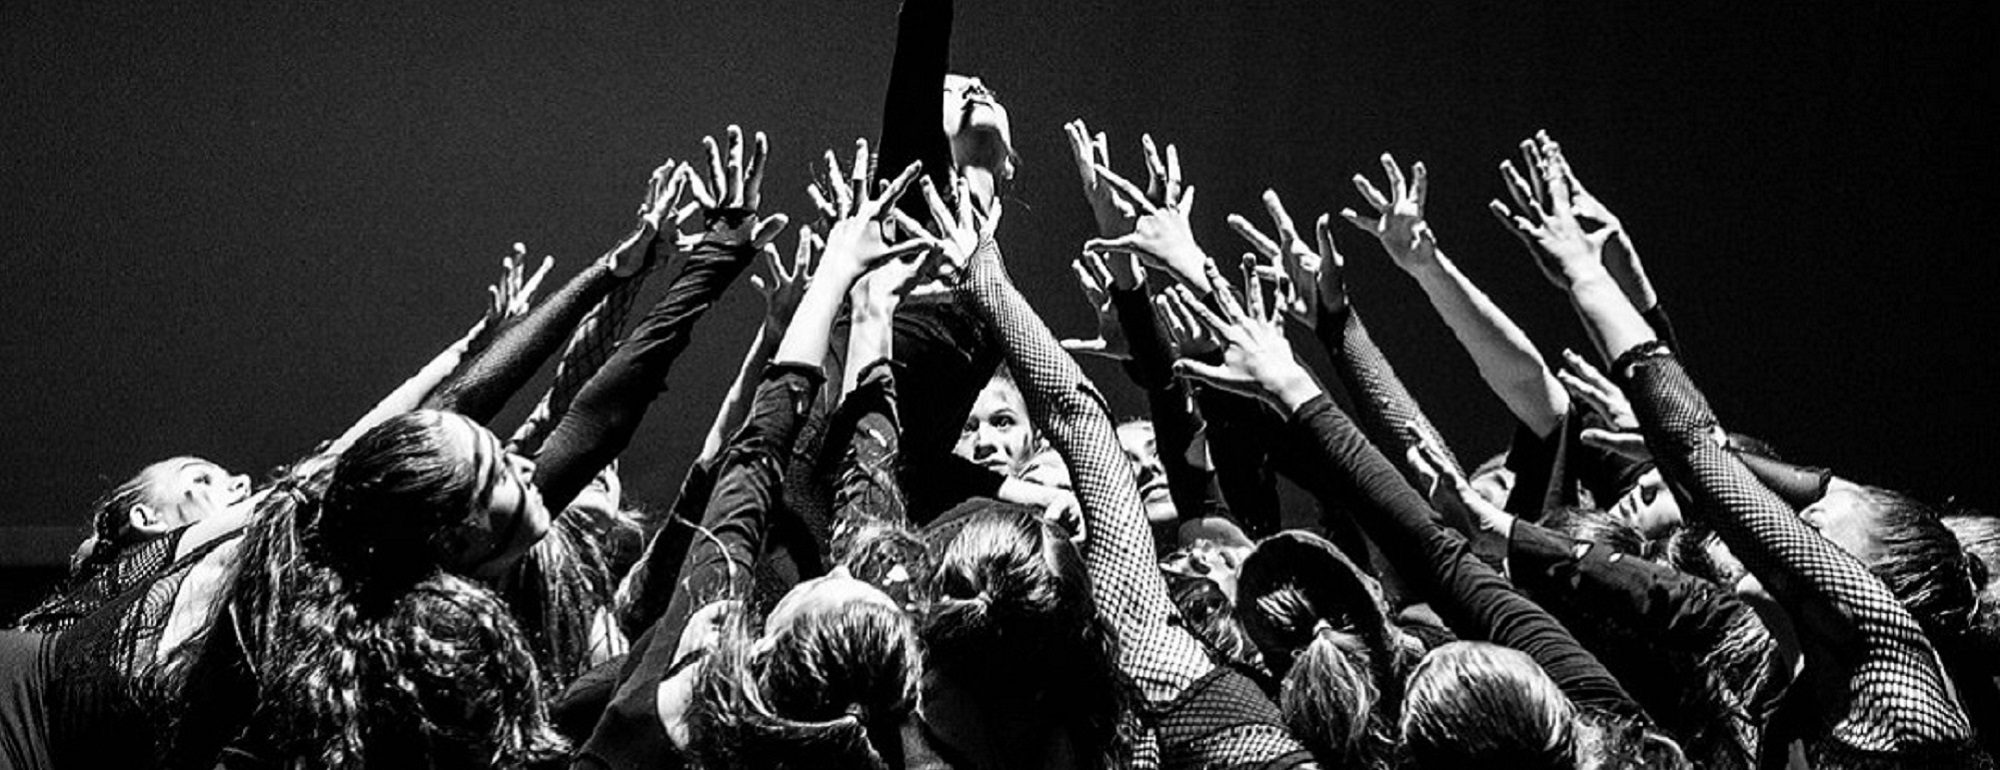 Black and white photo of dancers in a group with their hands in the air